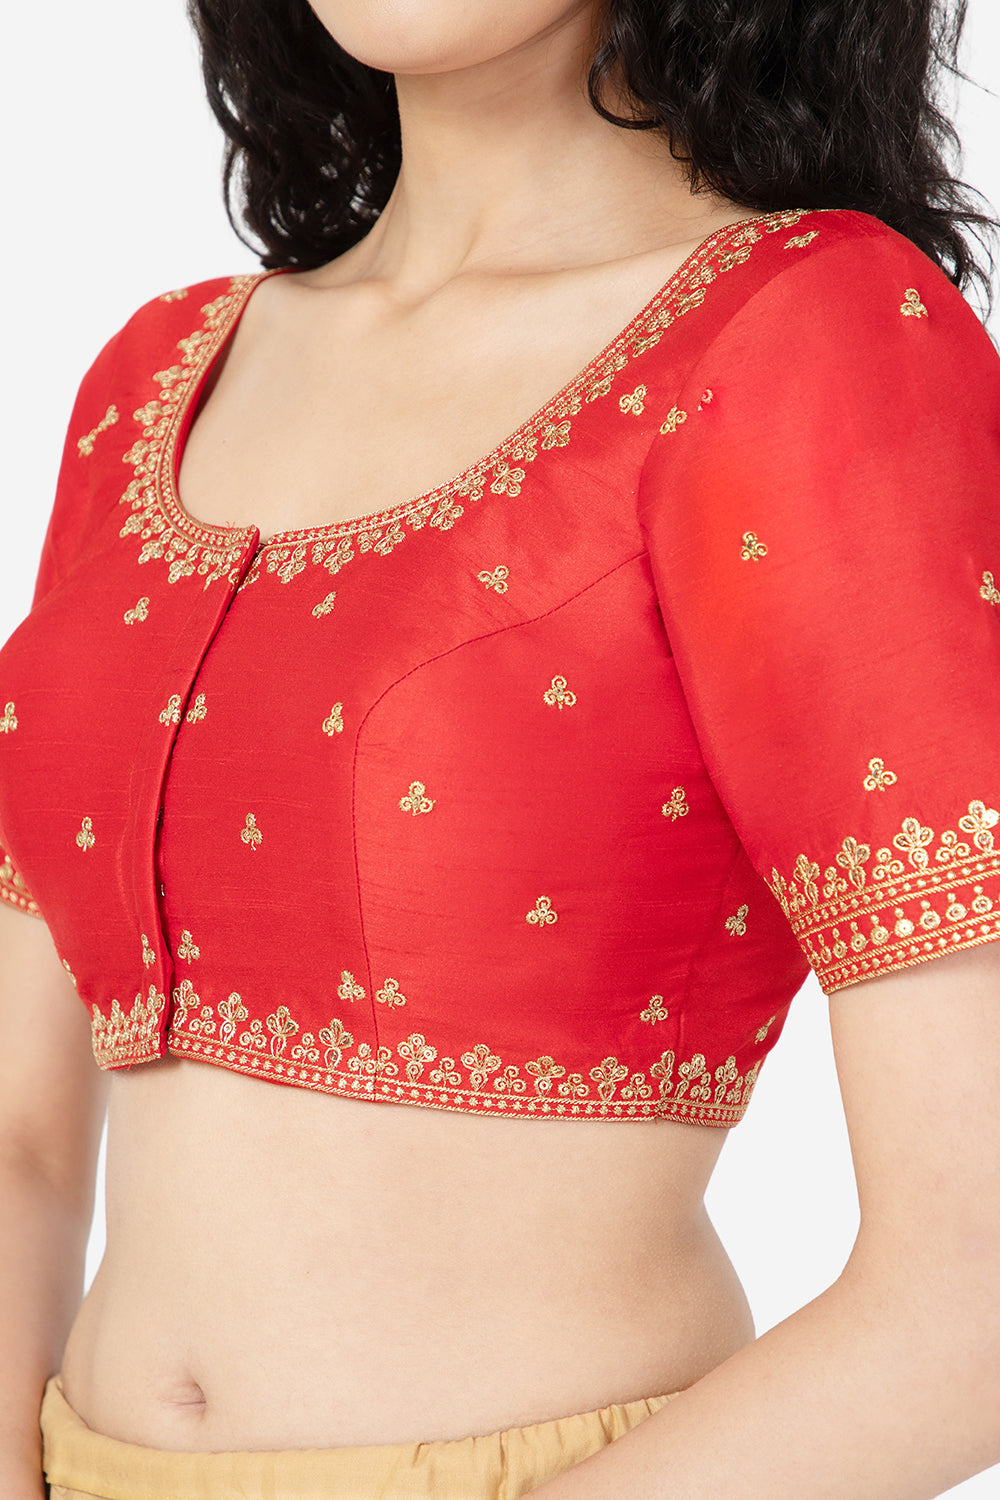 Naidu Hall Ethnic Saree Blouse with U-Neck Elbow Sleeves - Red